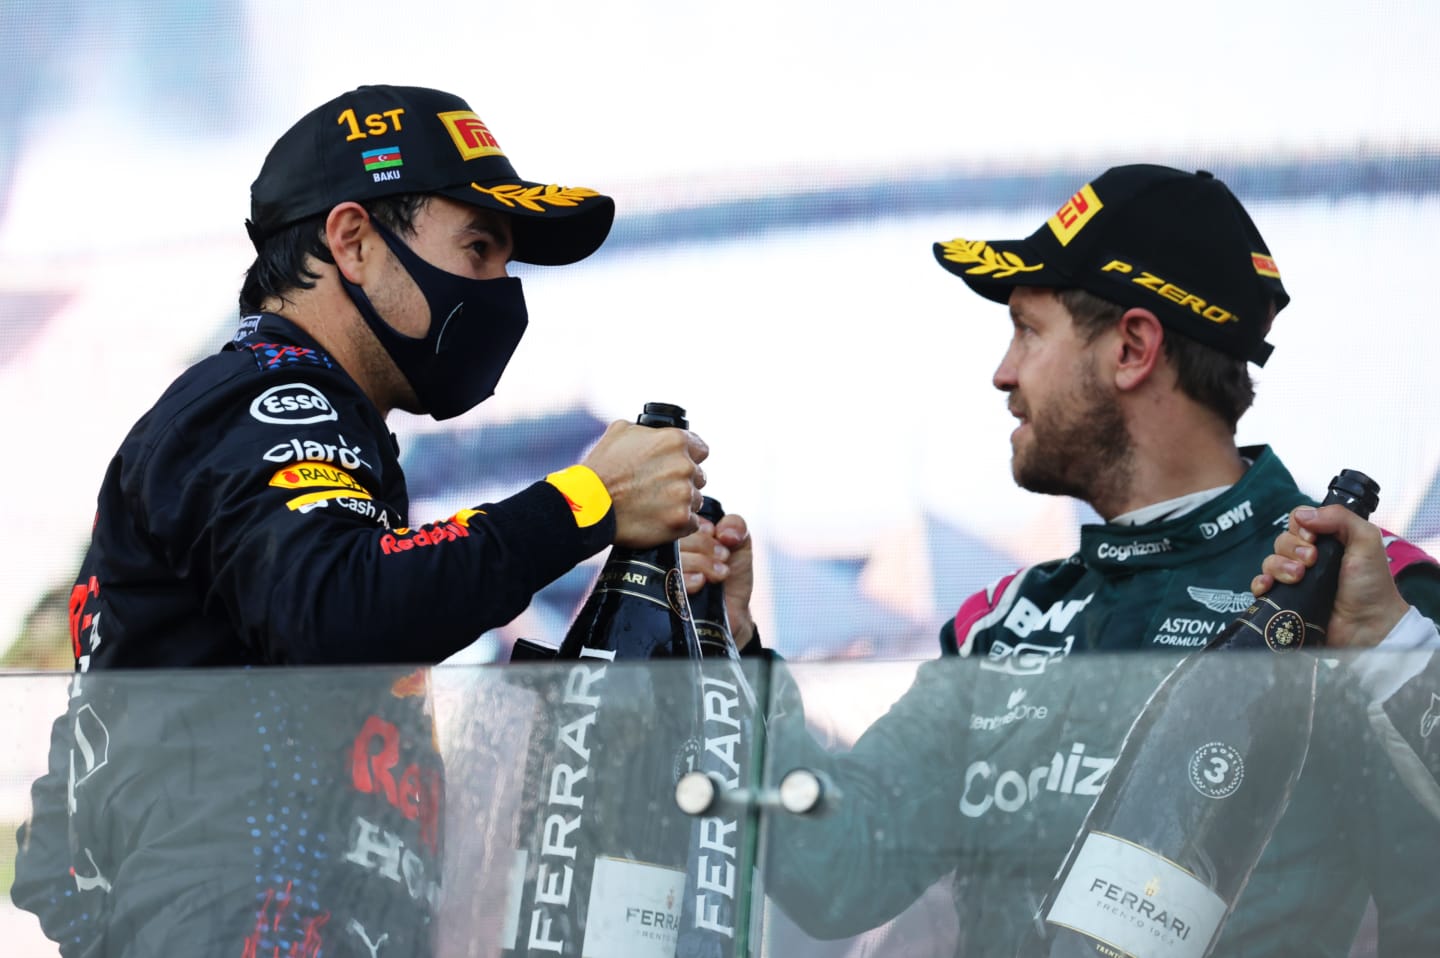 BAKU, AZERBAIJAN - JUNE 06: Race winner Sergio Perez of Mexico and Red Bull Racing and second placed Sebastian Vettel of Germany and Aston Martin F1 Team celebrate with sparkling wine on the podium during the F1 Grand Prix of Azerbaijan at Baku City Circuit on June 06, 2021 in Baku, Azerbaijan. (Photo by Clive Rose/Getty Images)